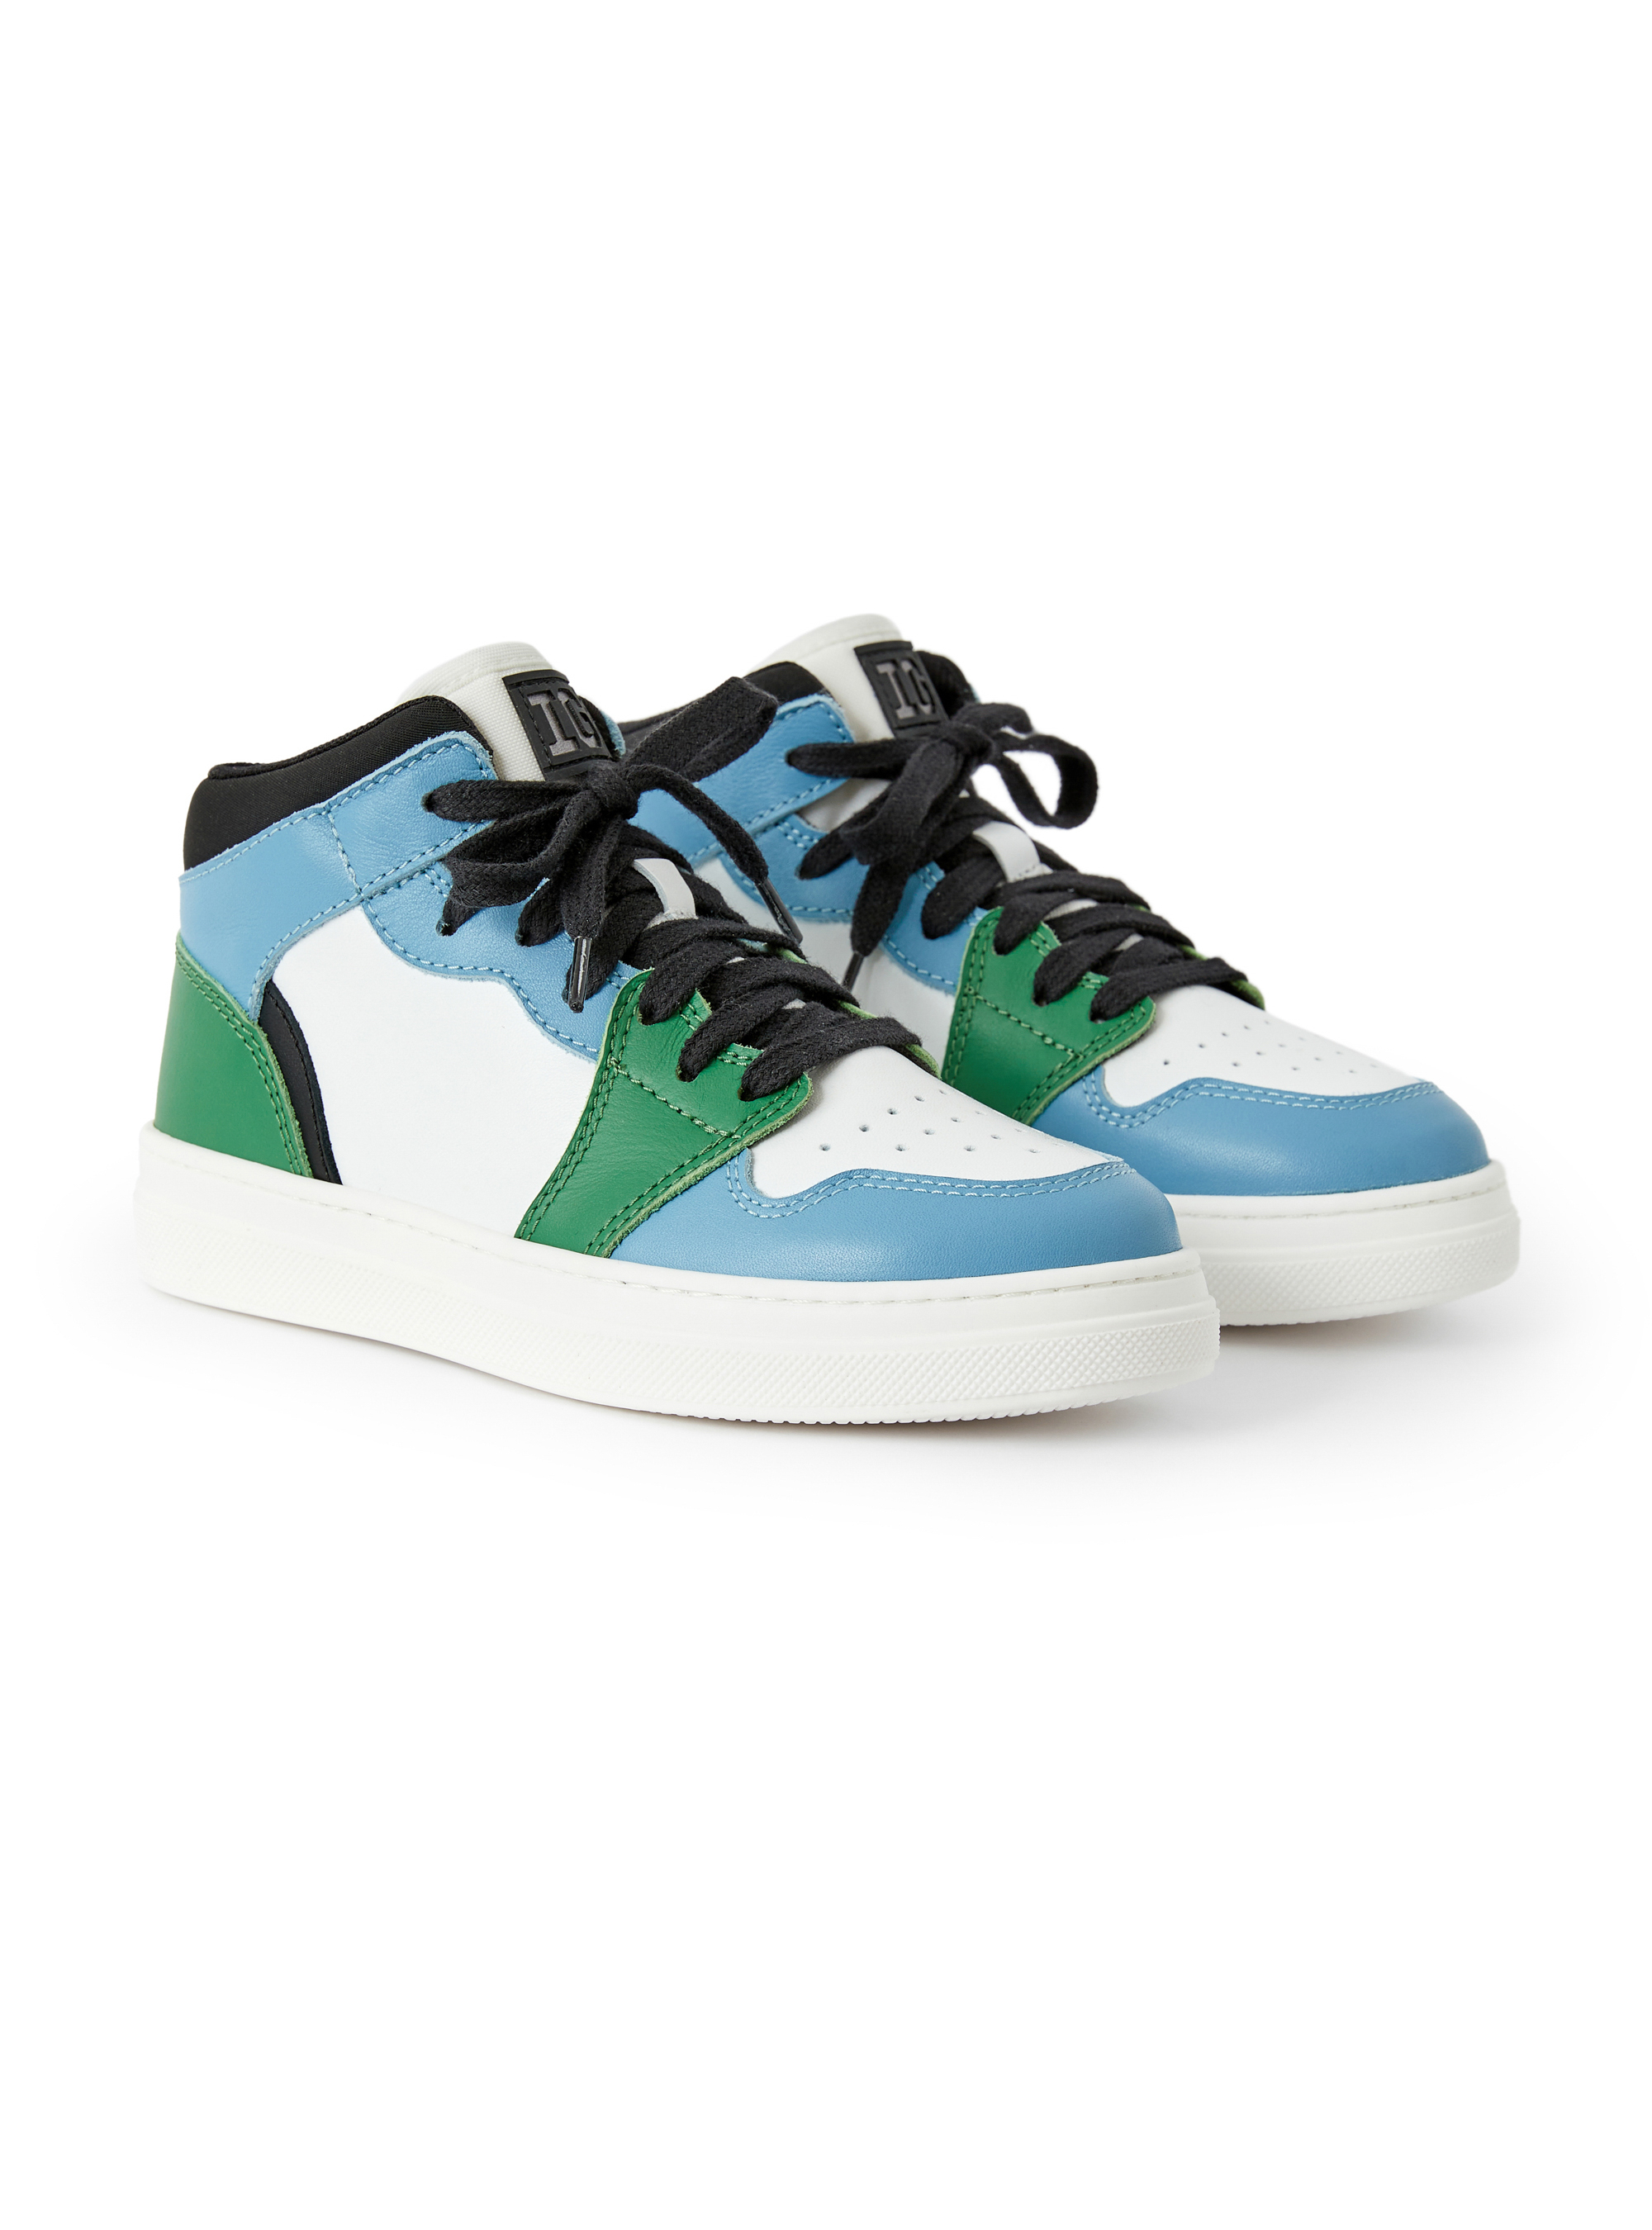 Multicolour leather high sneakers - Shoes - Il Gufo